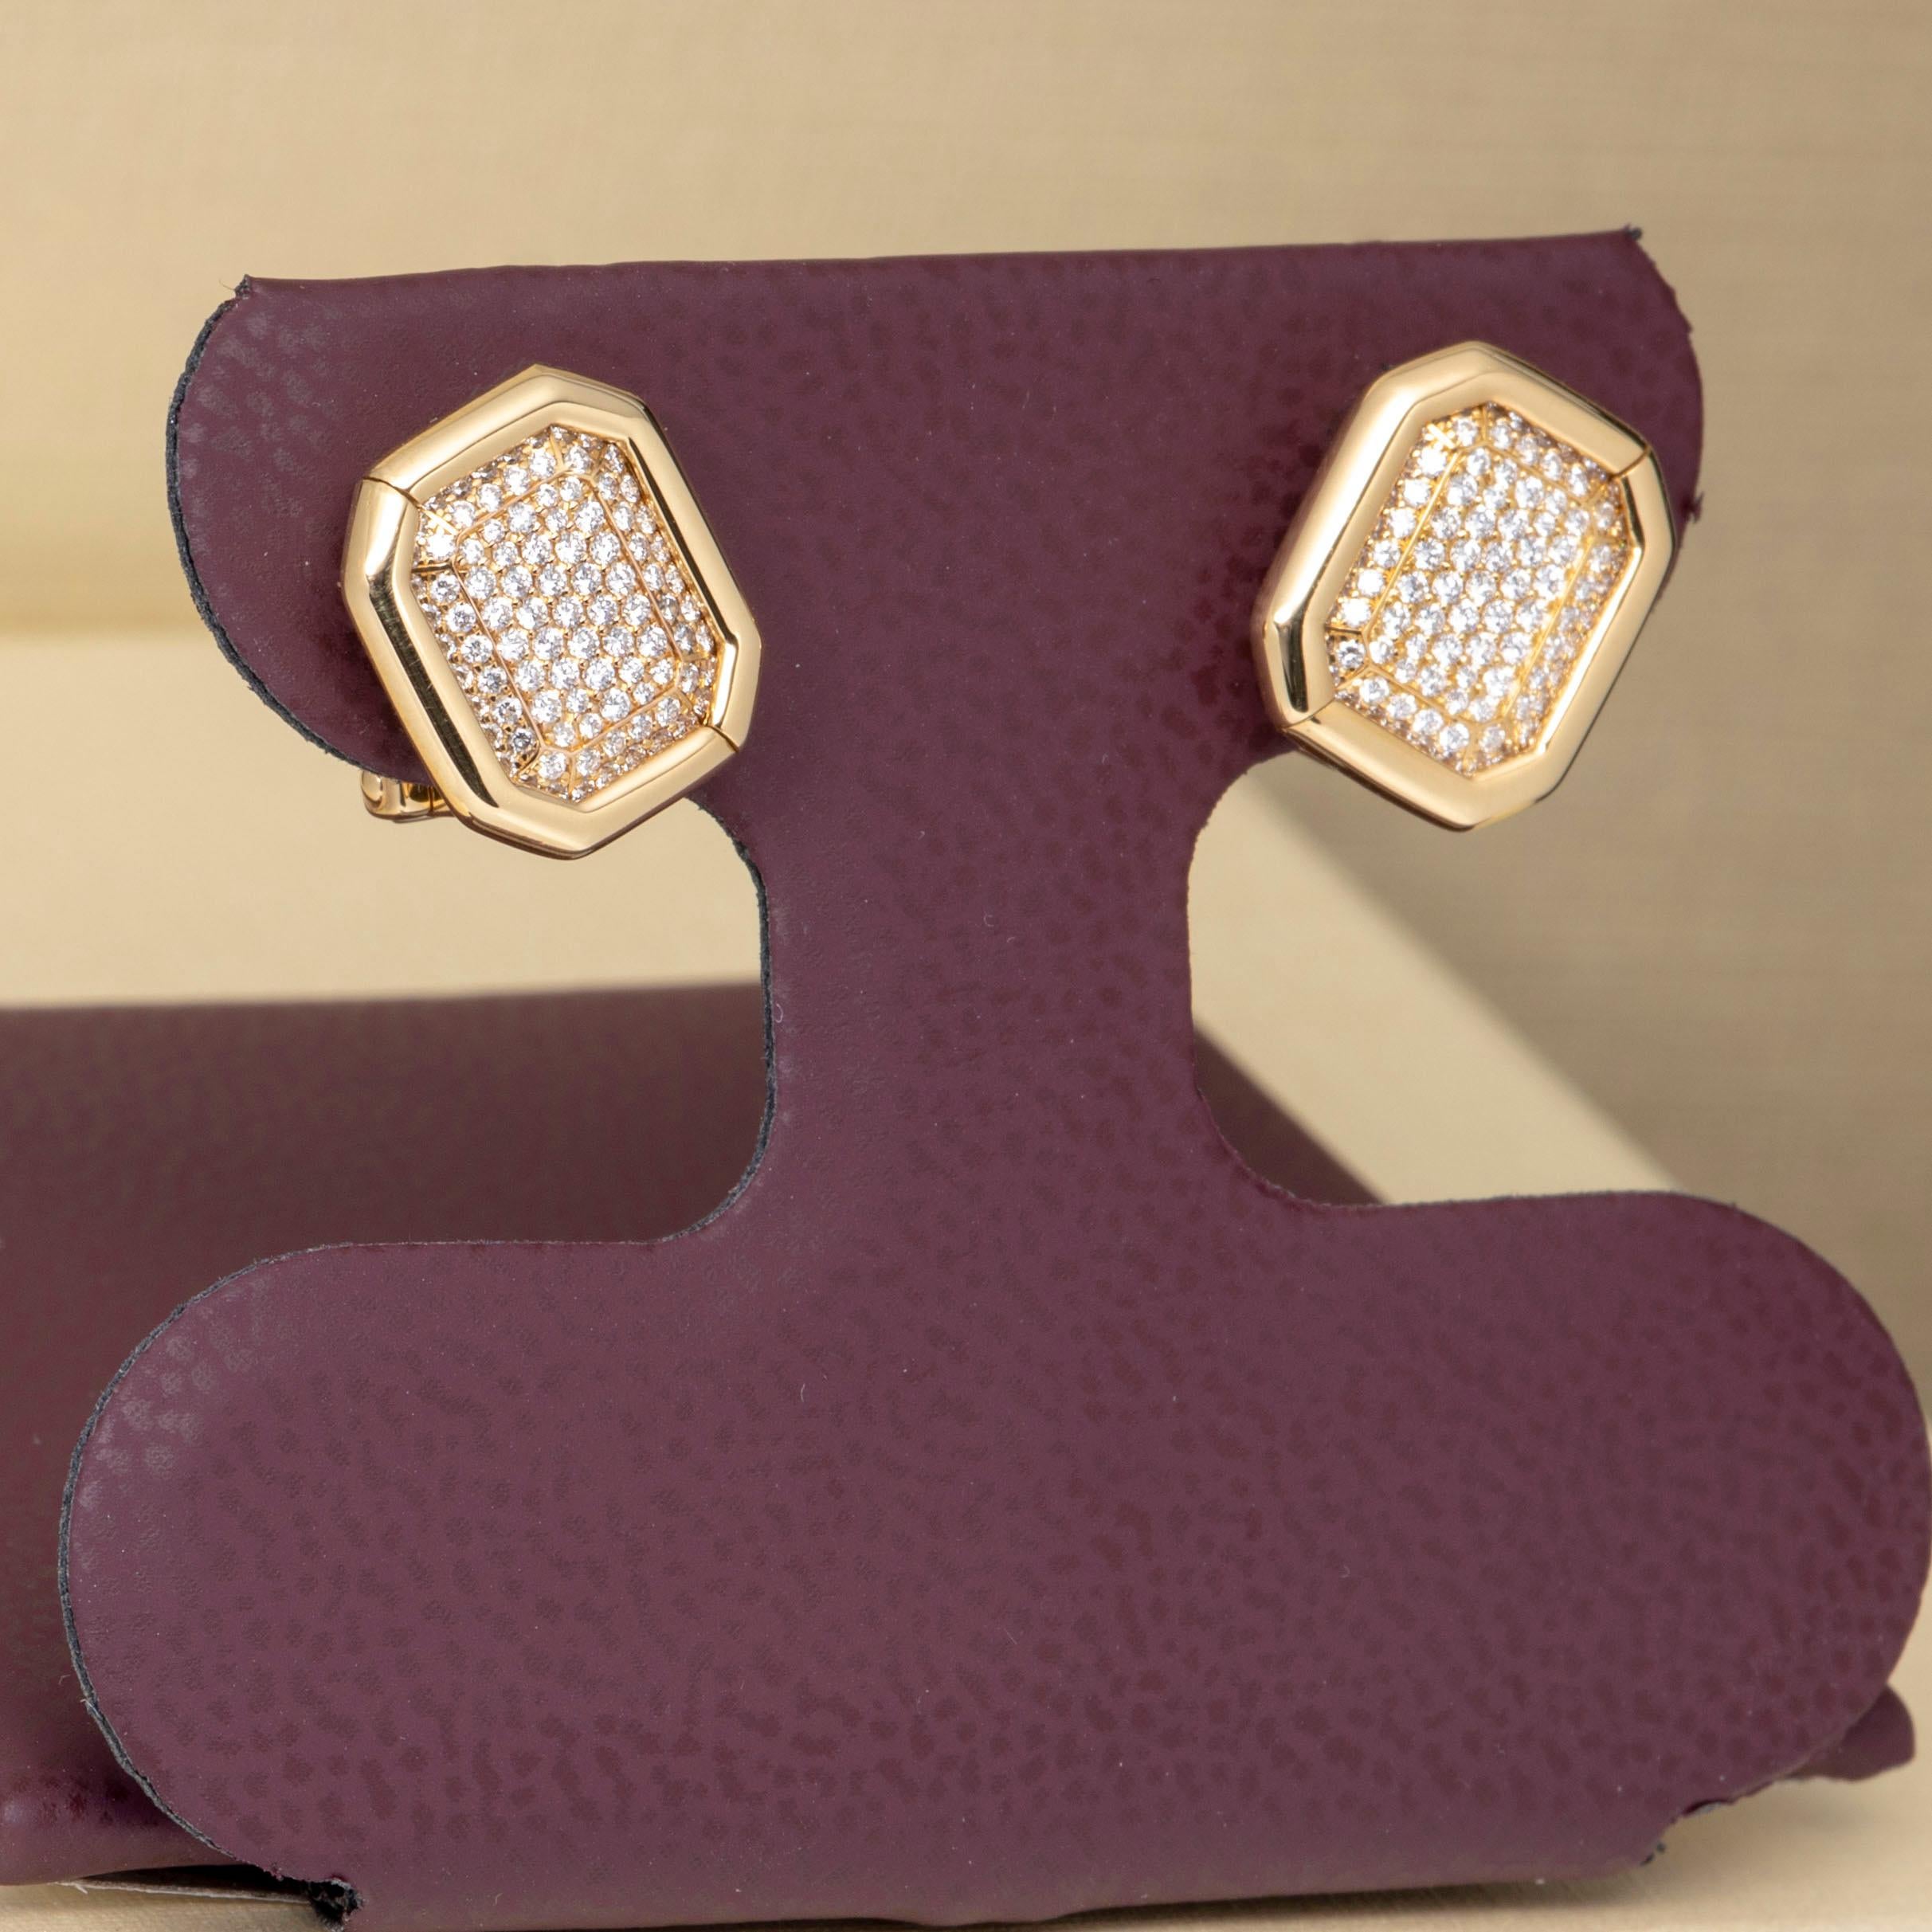 Chopard Yellow Gold Pave Diamond Earrings 84/6014 In Excellent Condition For Sale In New York, NY